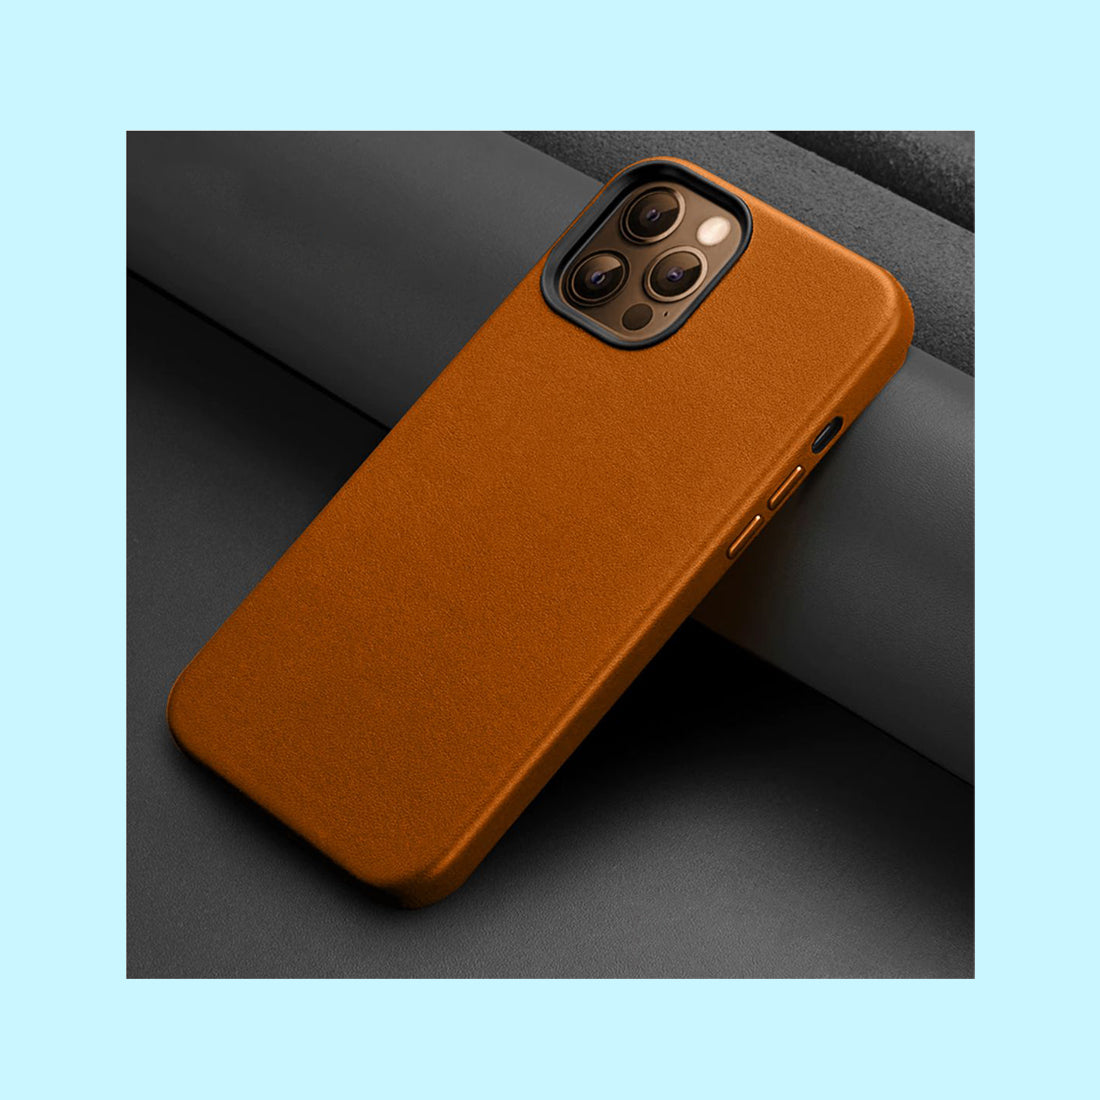 iPhone Leather Case with MagSafe Animation